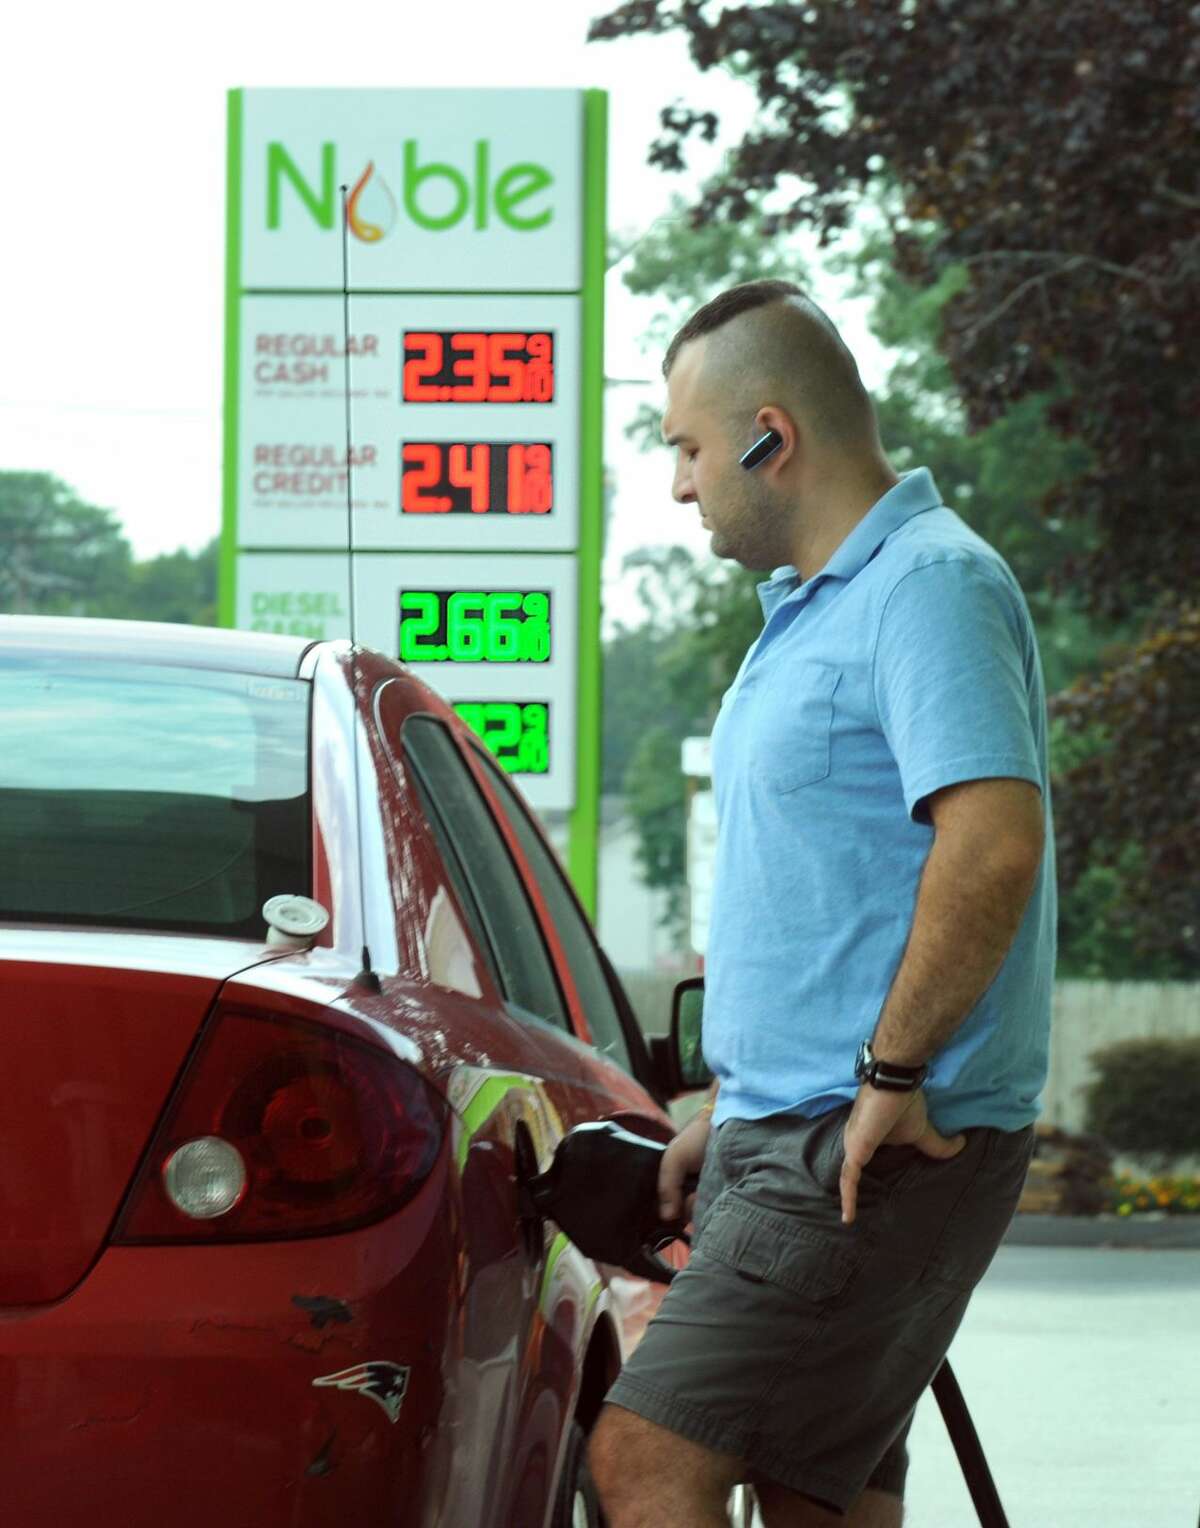 Come this fall, the price of gasoline could fall as much as 25 cents a gallon. AAA Northeast forecasts that the majority of motorists in Connecticut and across the Northeast and Mid-Atlantic region will likely see potential savings of up to 25 cents a gallon this fall compared with this summer’s prices.